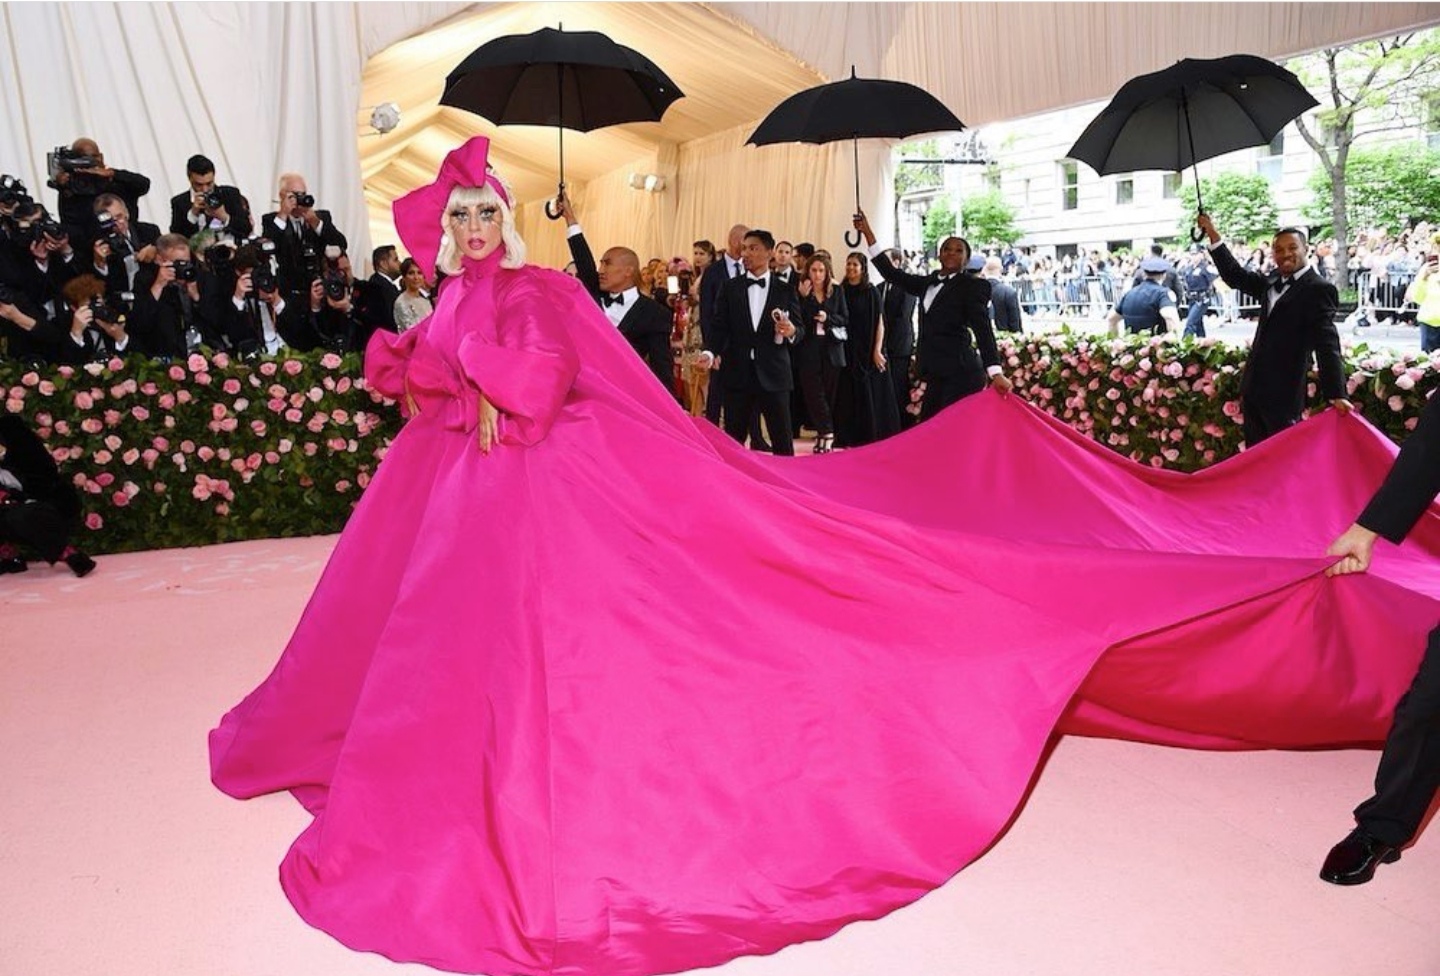 The “campiest” looks at this year’s Met Gala